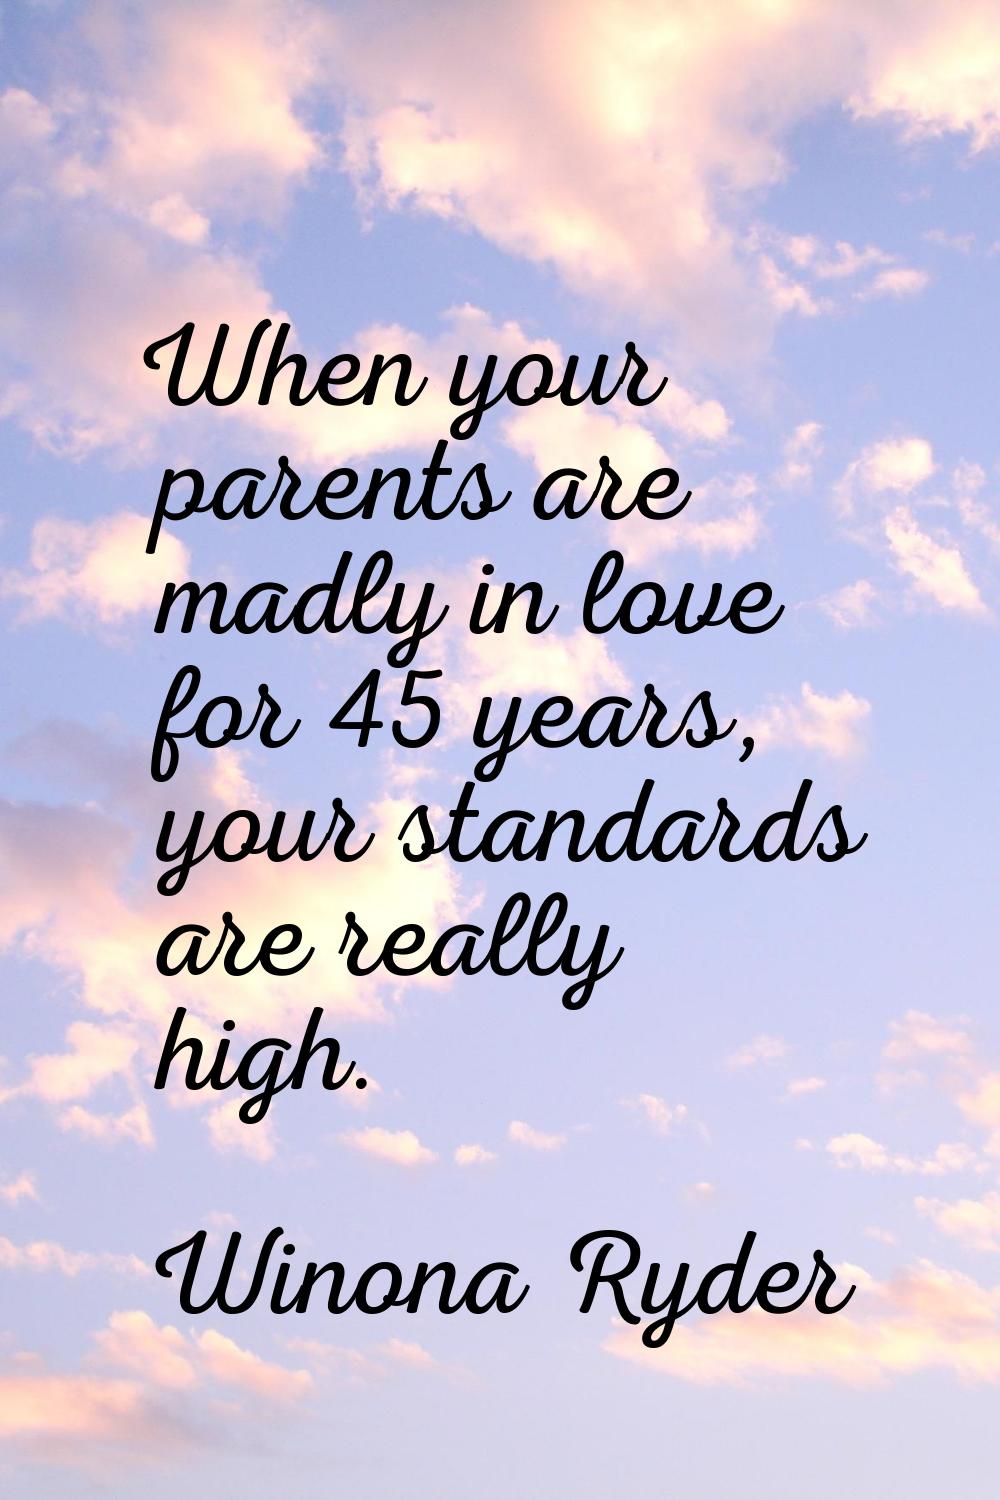 When your parents are madly in love for 45 years, your standards are really high.